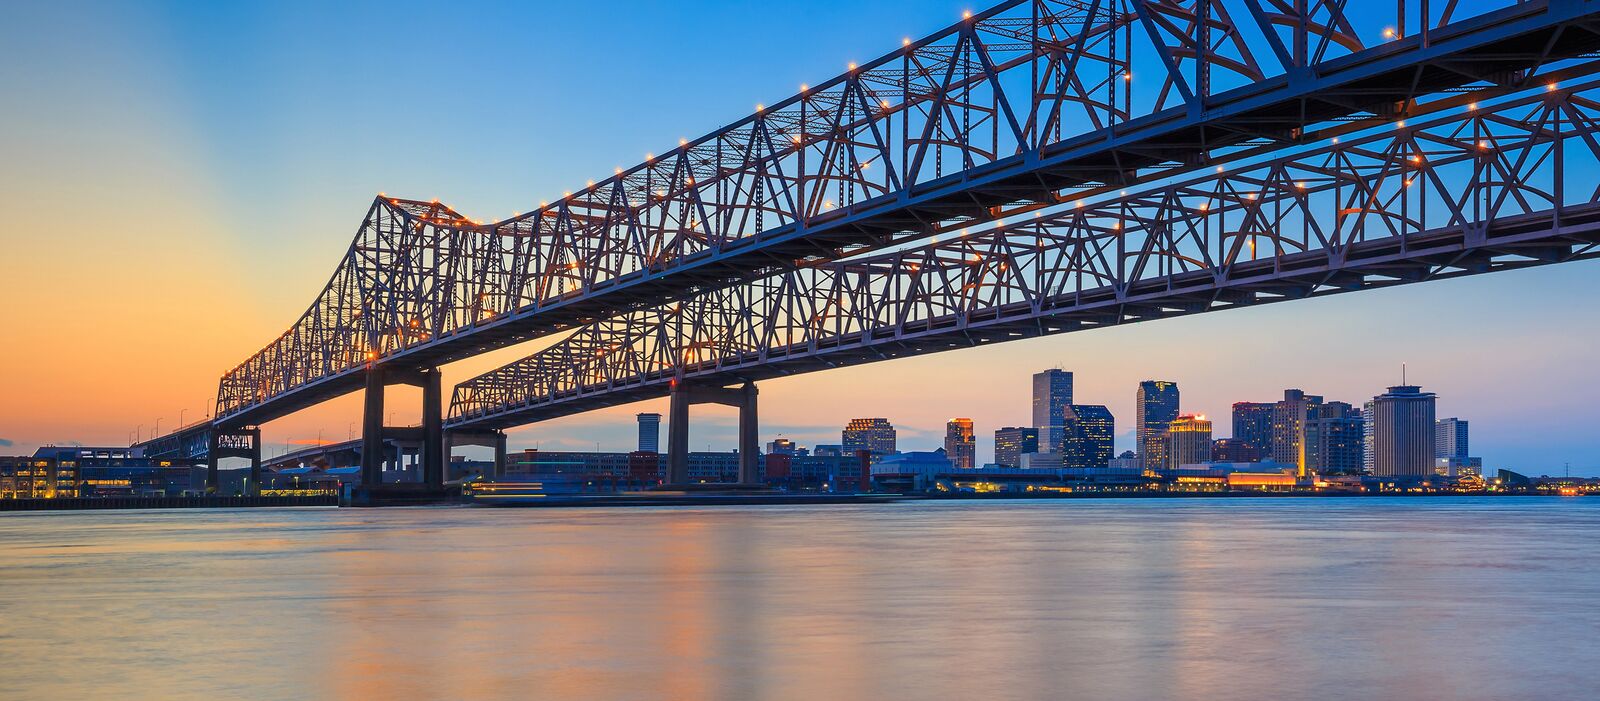 The Crescent City Connection, Mississippi River, New Orleans, Louisiana